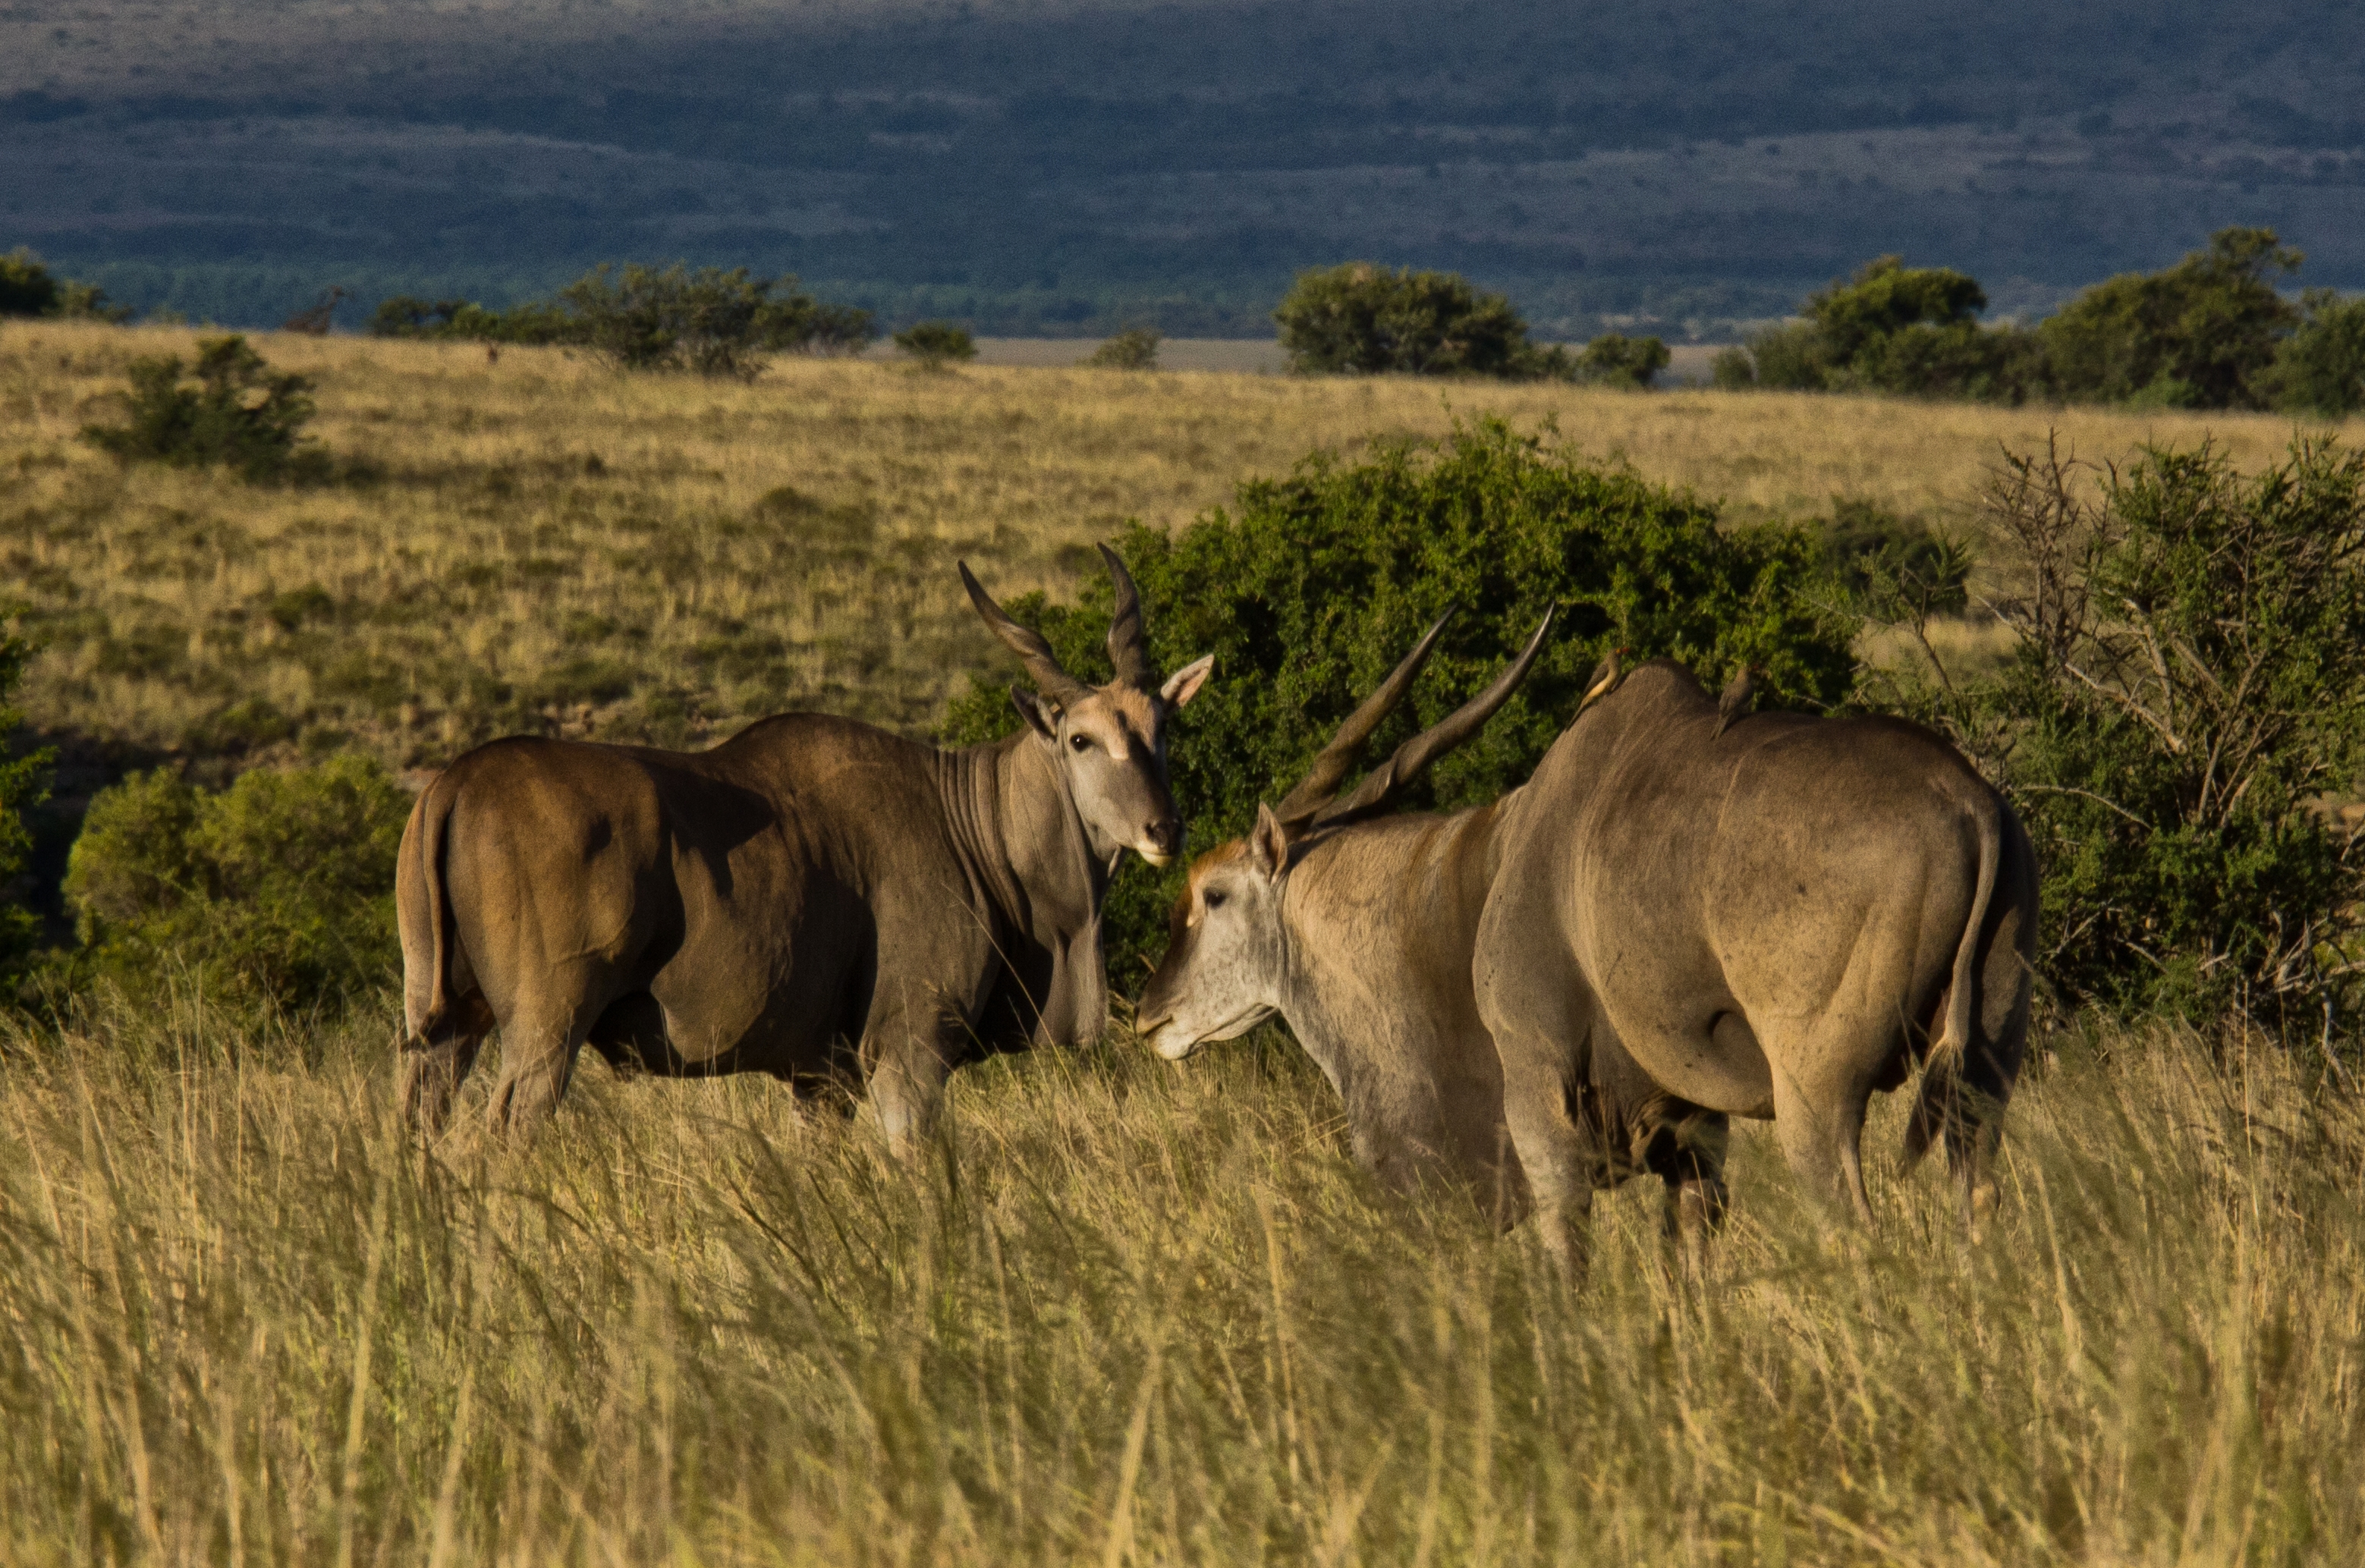 Eland, the largest antelope in Africa, is the ultimate survivor, able to thrive in all kinds of habitats. It was almost domesticated, but its ability to effortlessly clear three metre fences makes farming them too much of a challenge.